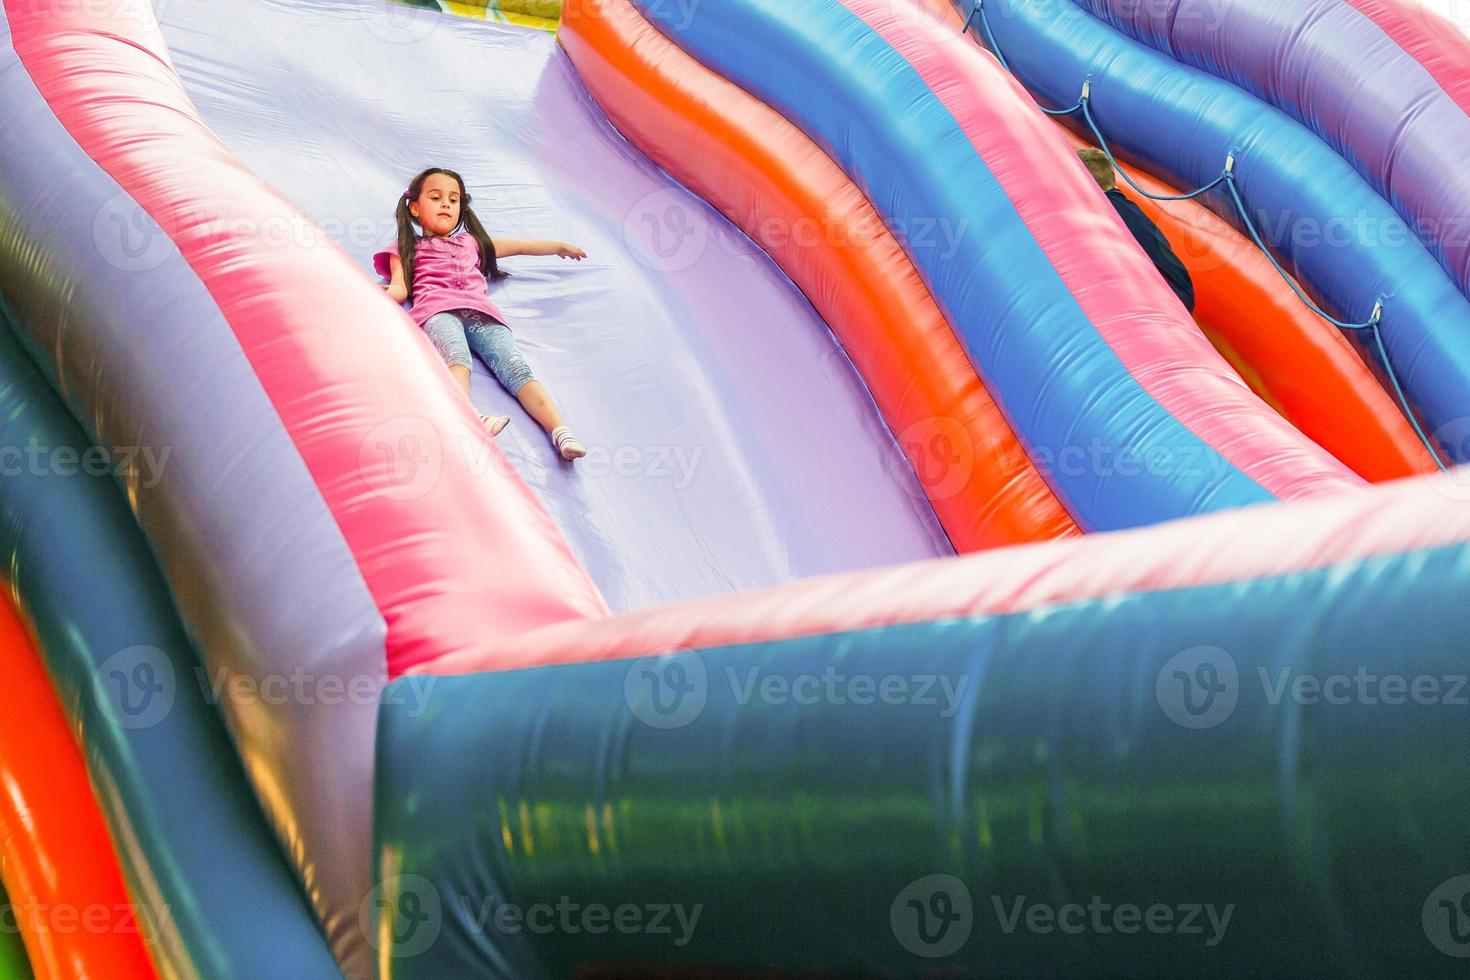 A cheerful child plays in an inflatable castle photo